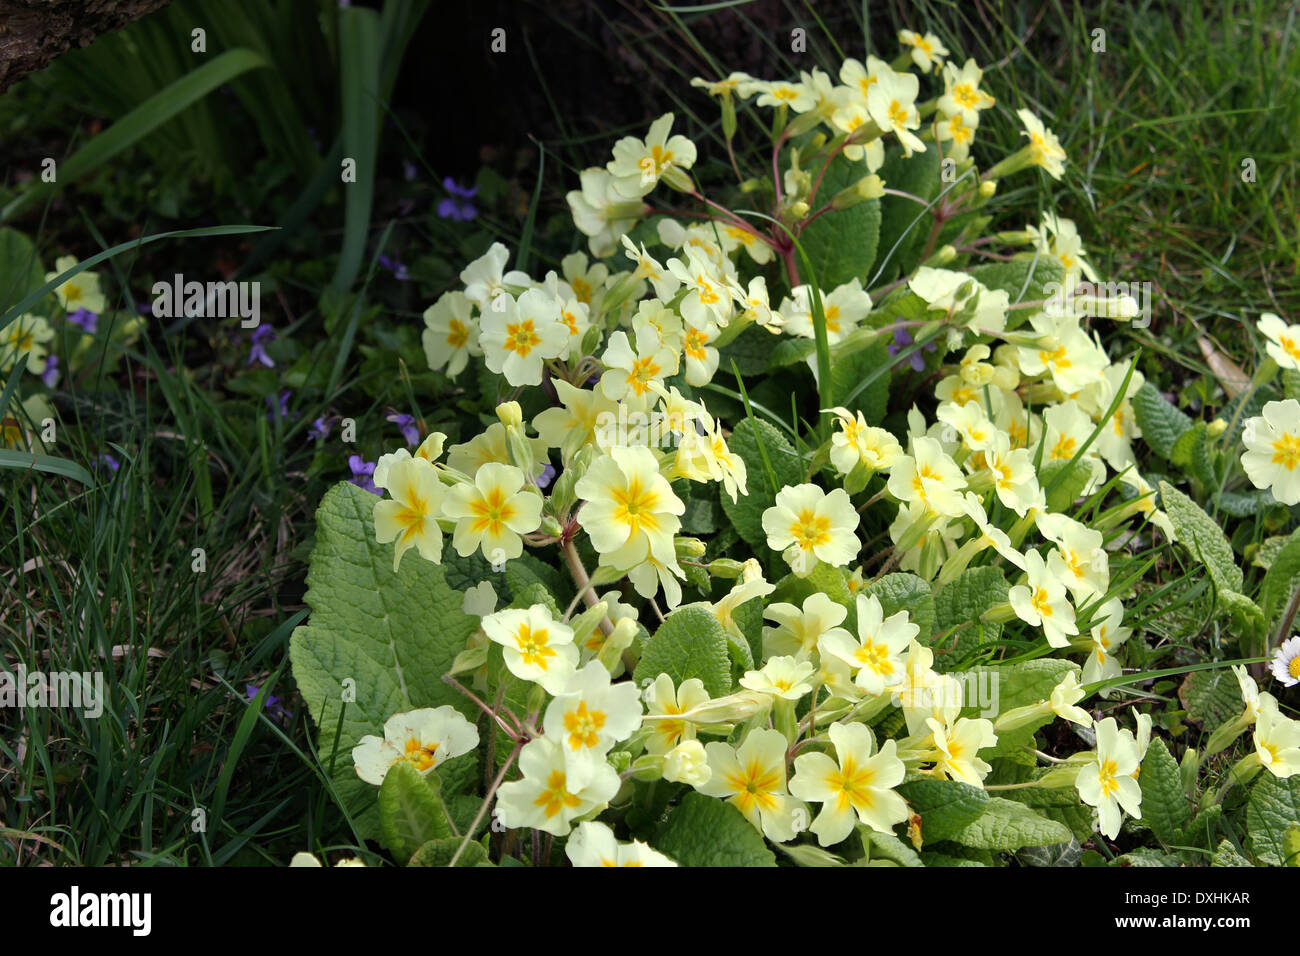 Primroses and violets flowering in spring Stock Photo